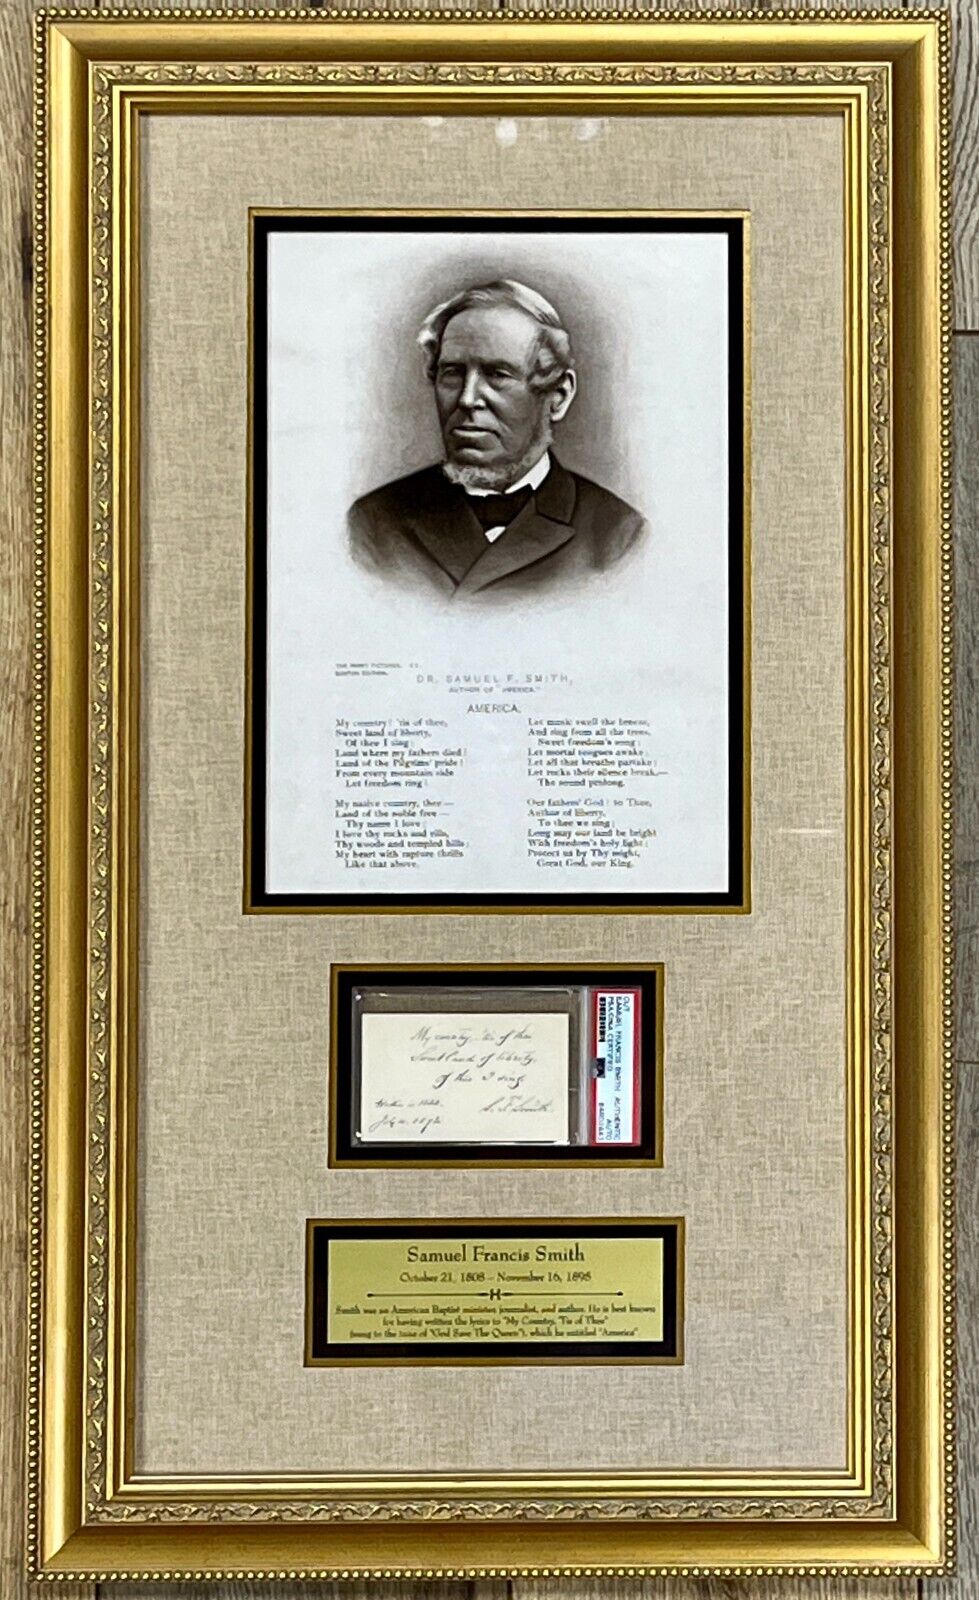 SAMUEL FRANCIS SMITH (America-My Country Tis of Thee) signed framed display-PSA